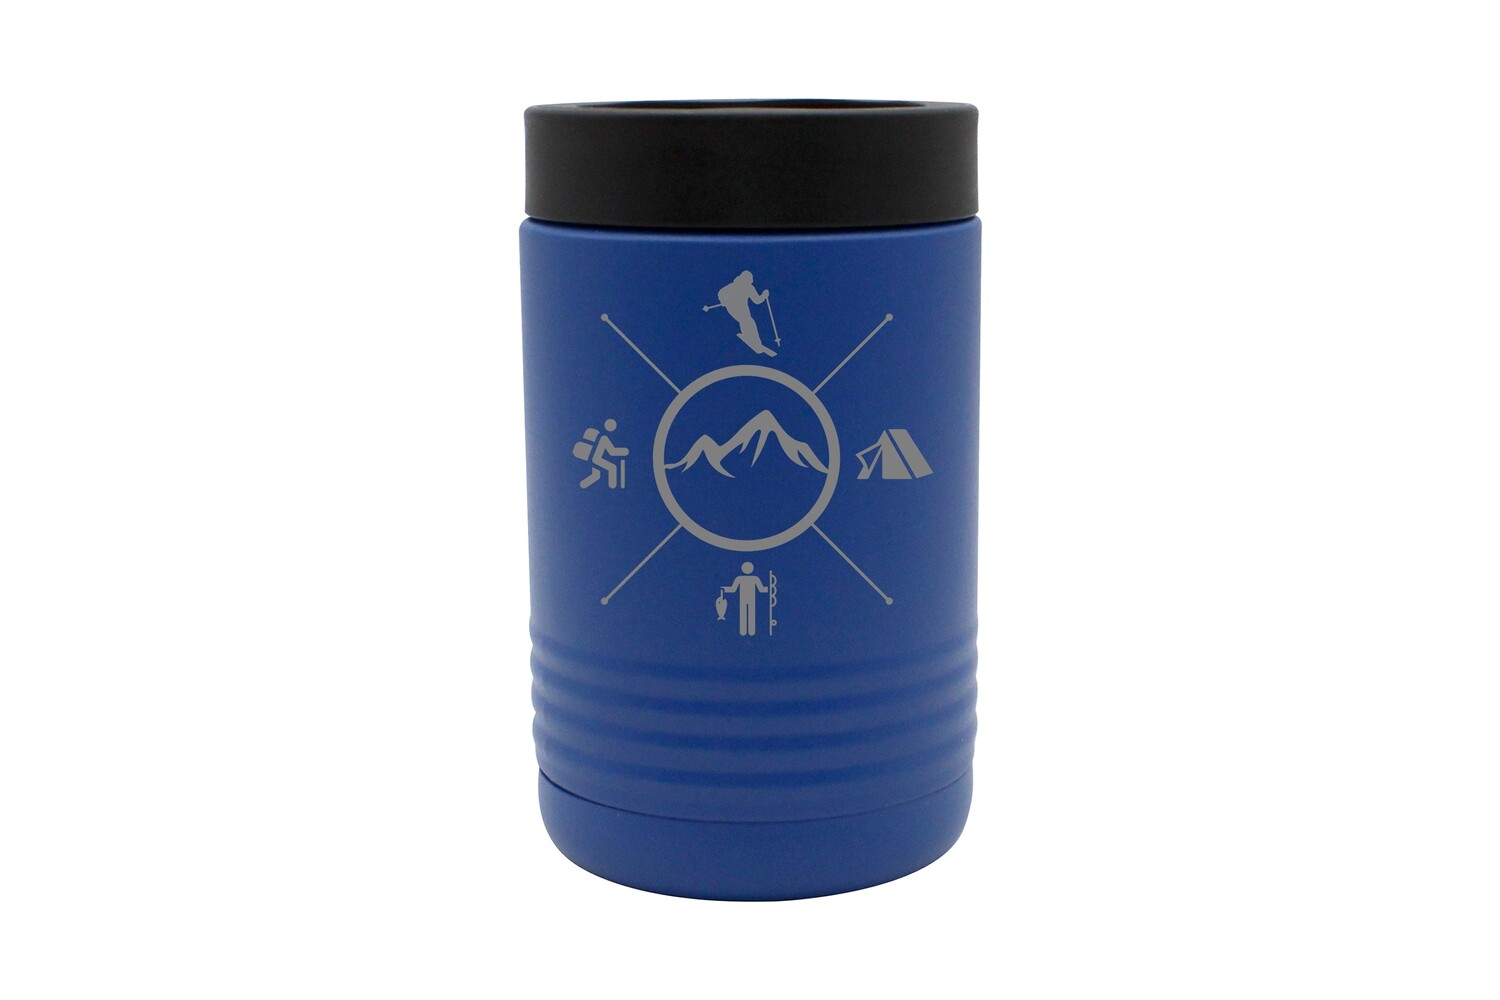 Skier with Outdoor Themes Insulated Beverage Holder